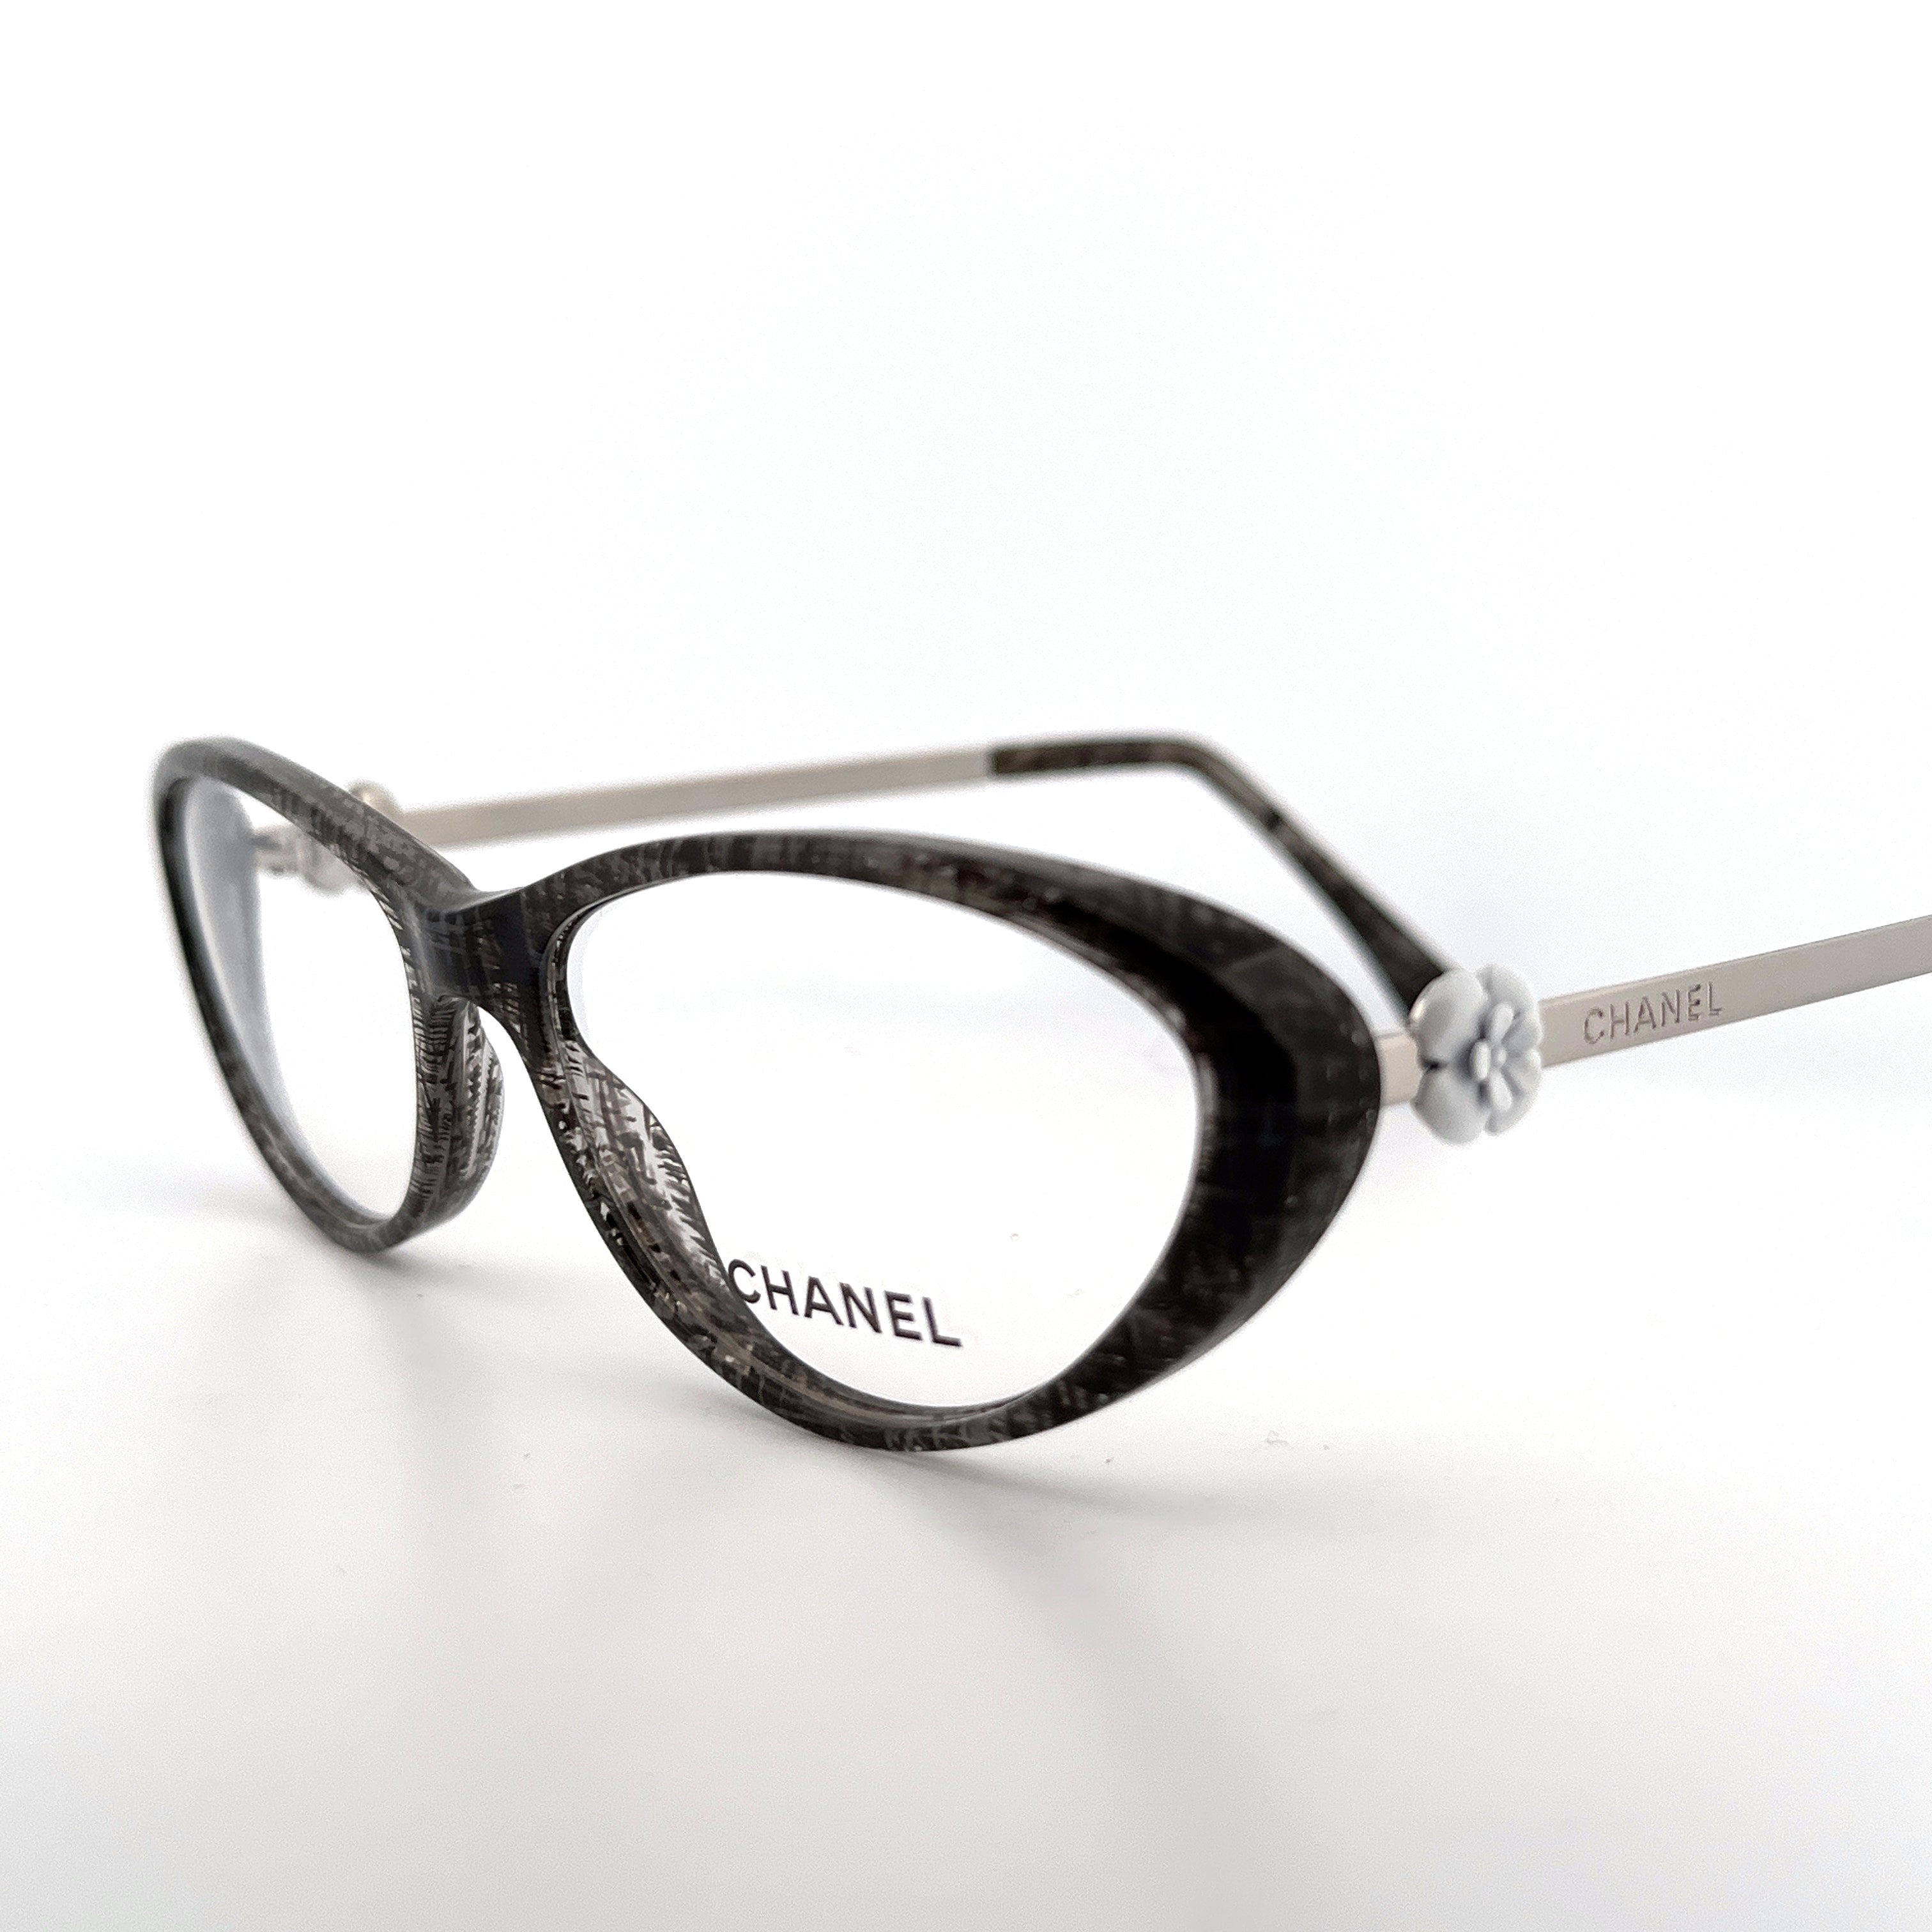 Chanel 3196 Eyeglasses Frames Size 54-15 Made in Italy –